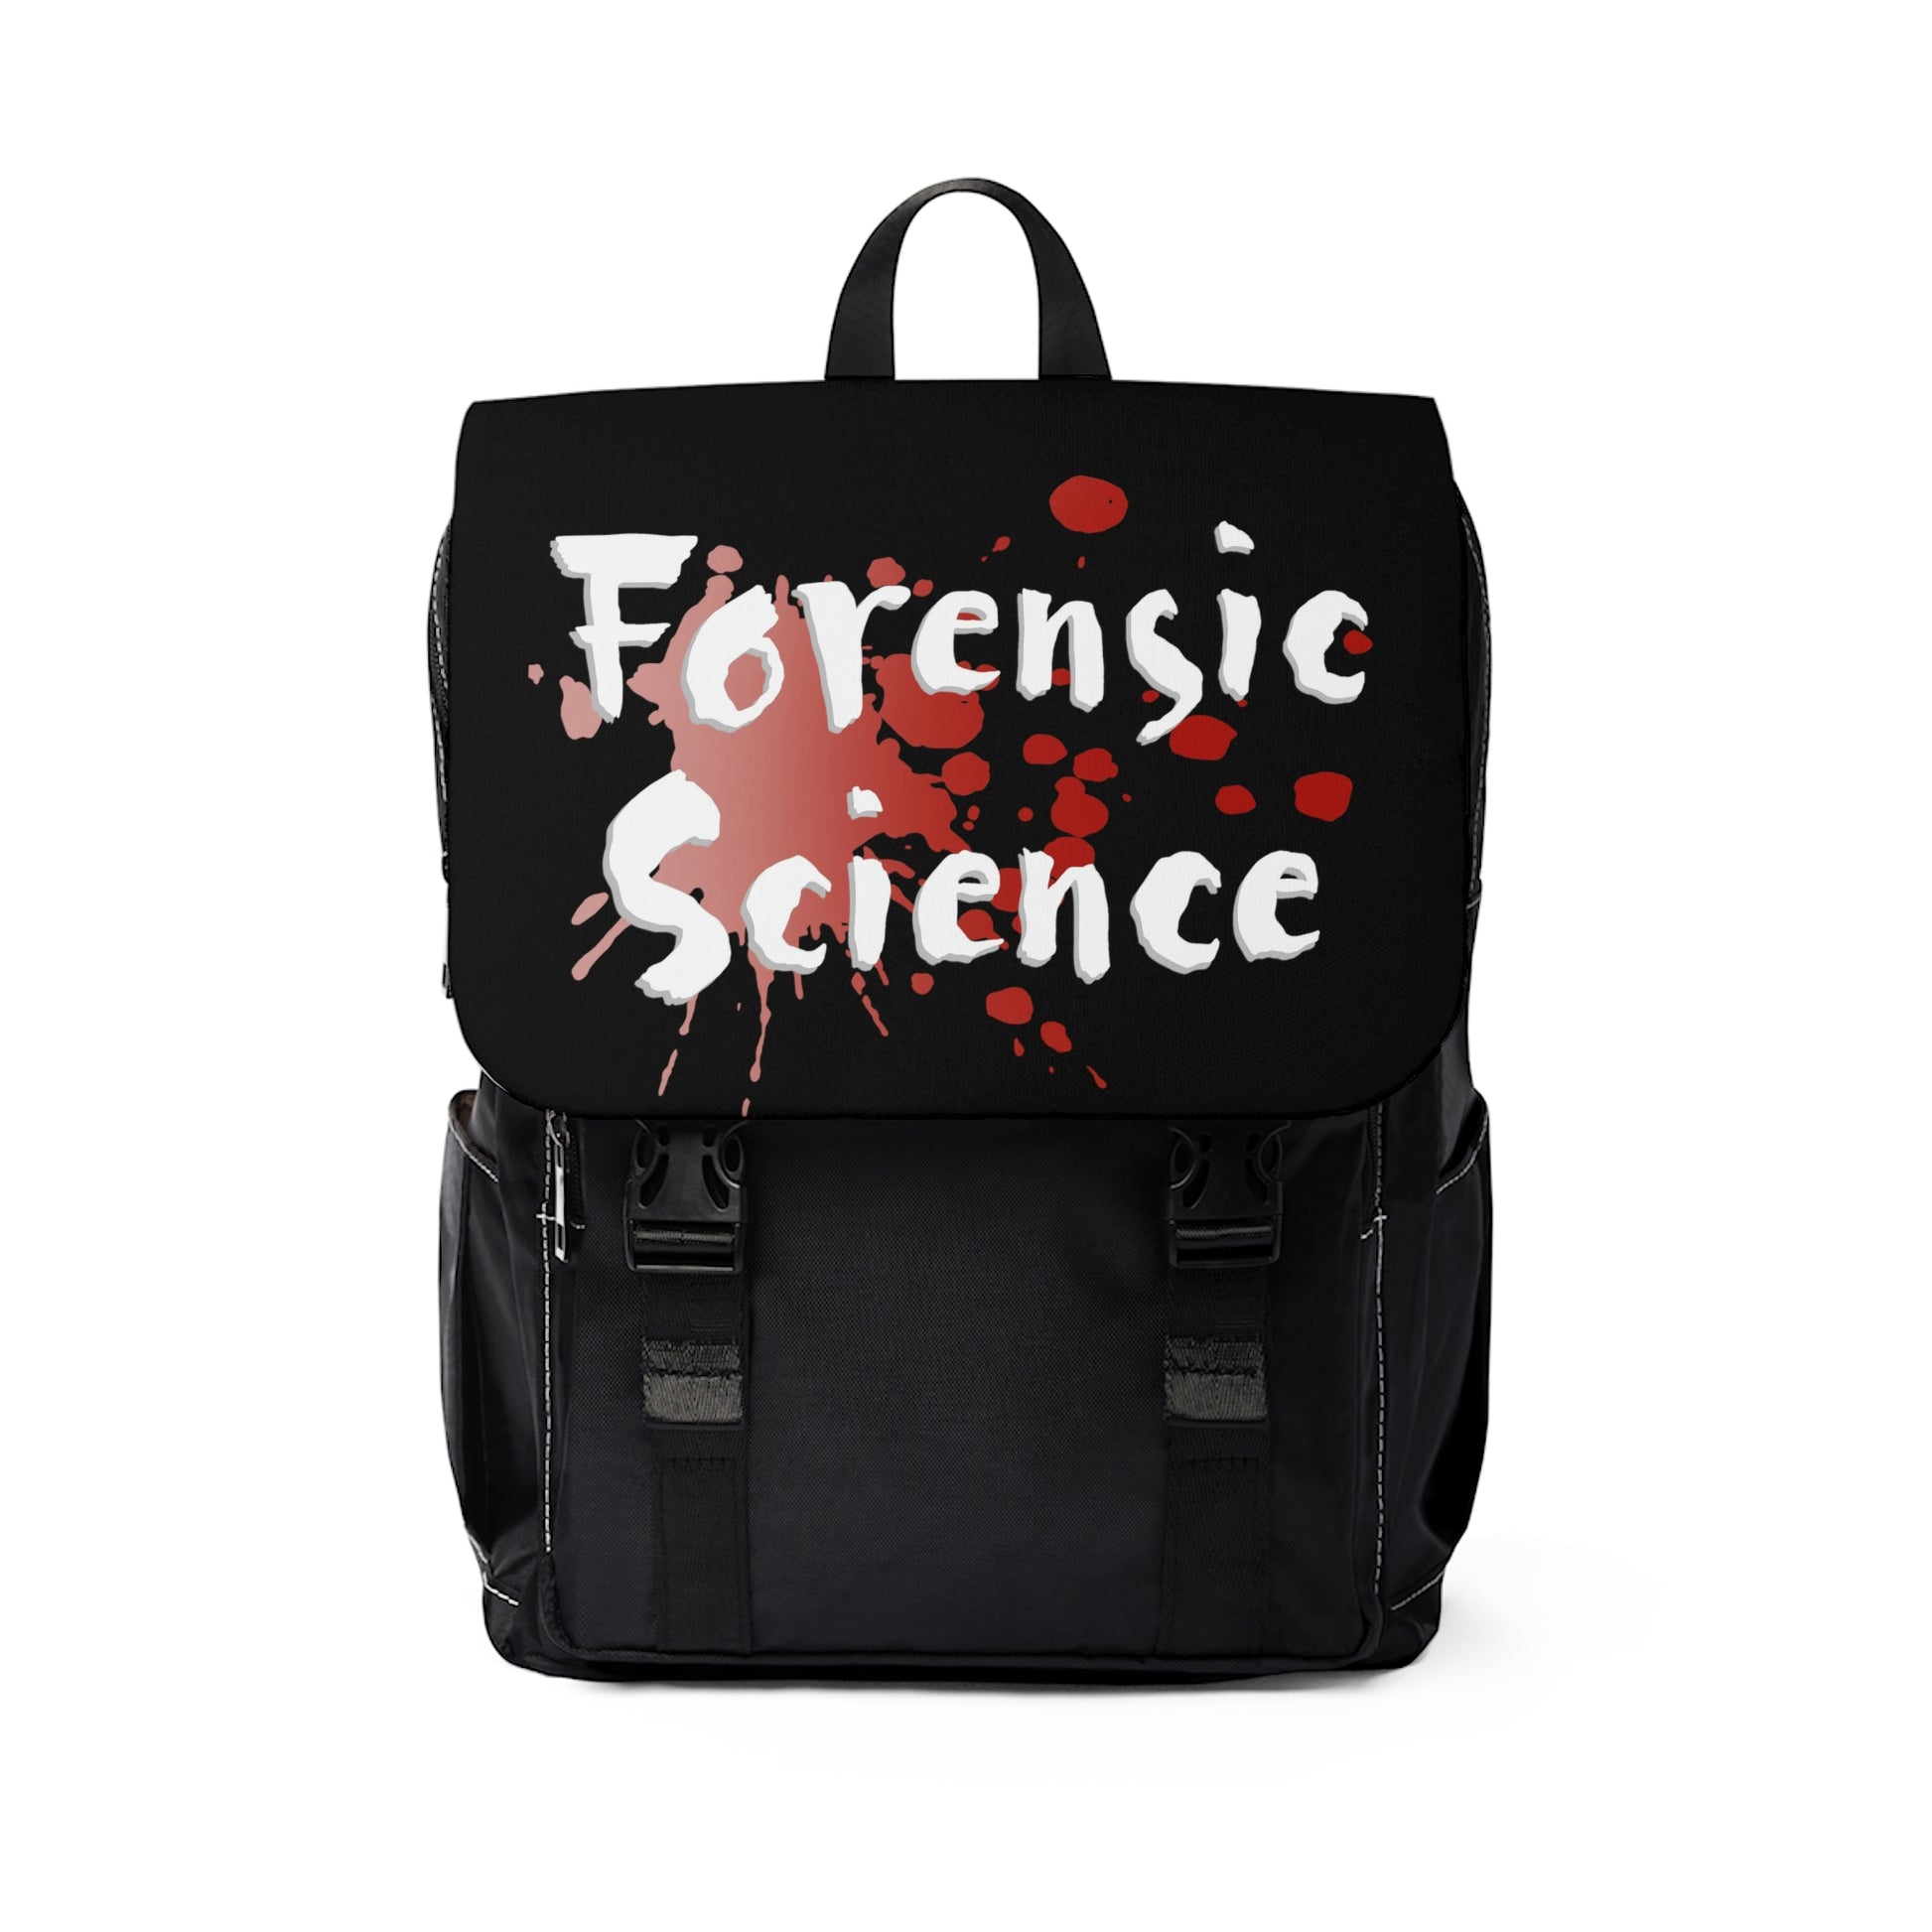 This Forensic Science Casual backpack is in a classic shape with a front flap design. It is made of durable Oxford canvas. It has two slip interior pockets and one laptop sleeve in the main compartment, a front zipper pocket, and two side pockets.